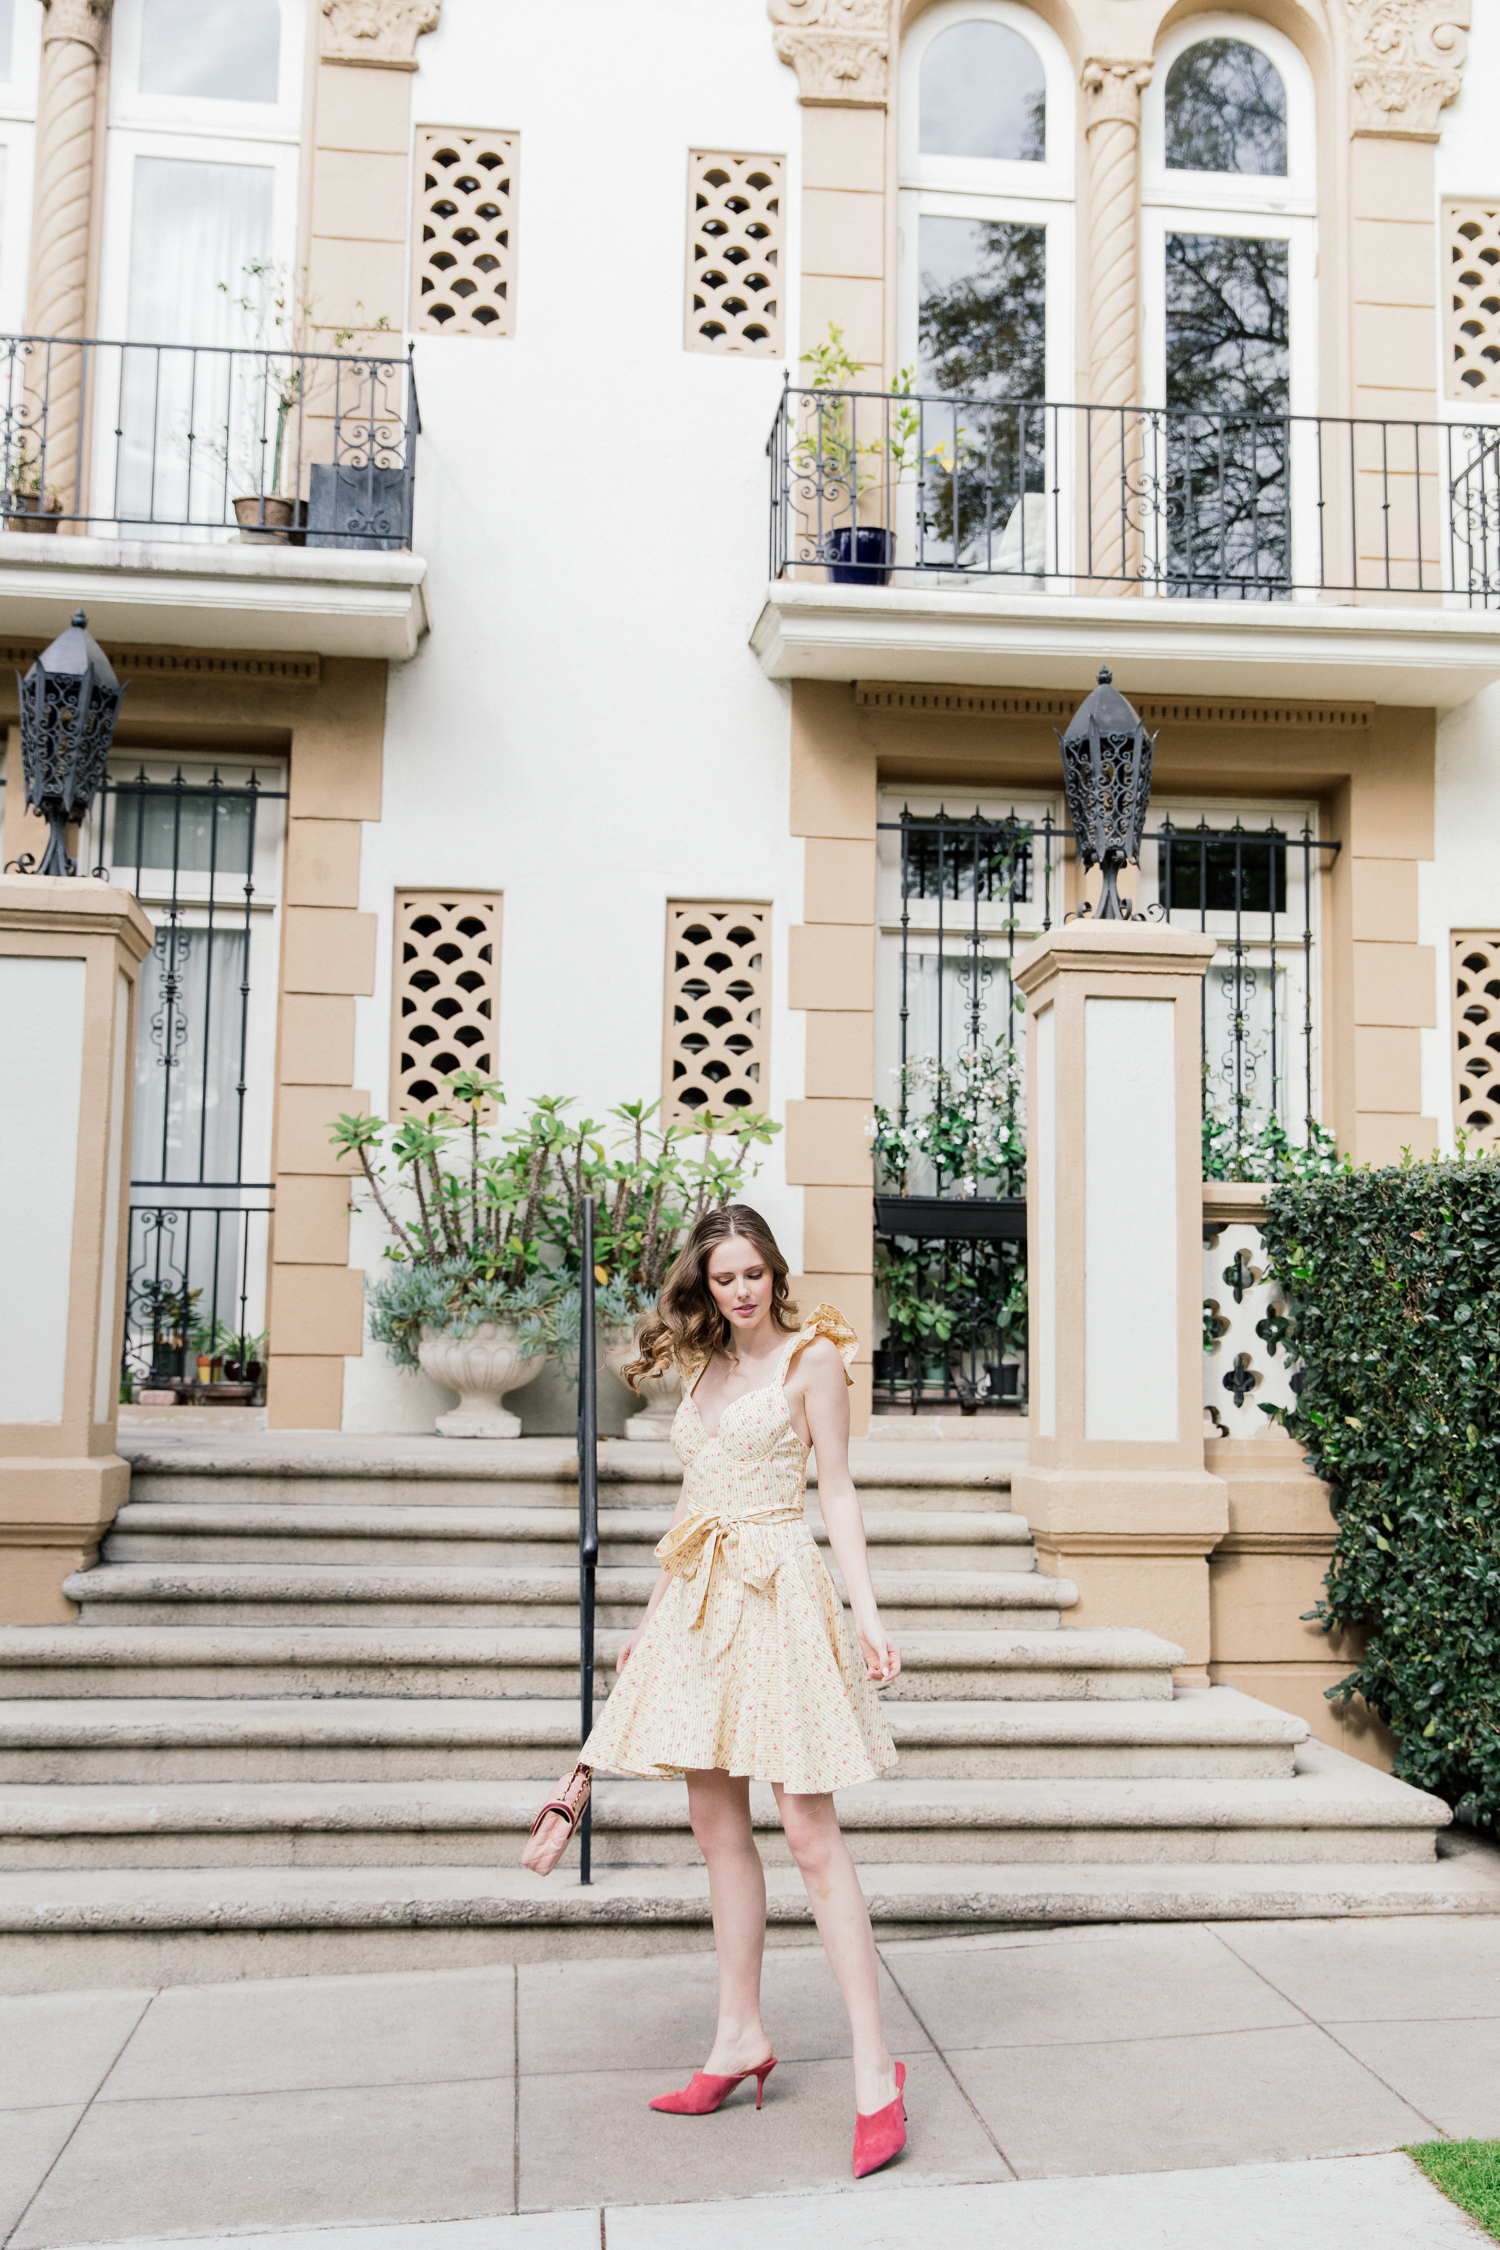 Alyssa Campanella of The A List blog shares her favorite floral dresses wearing Petersyn Cate dress